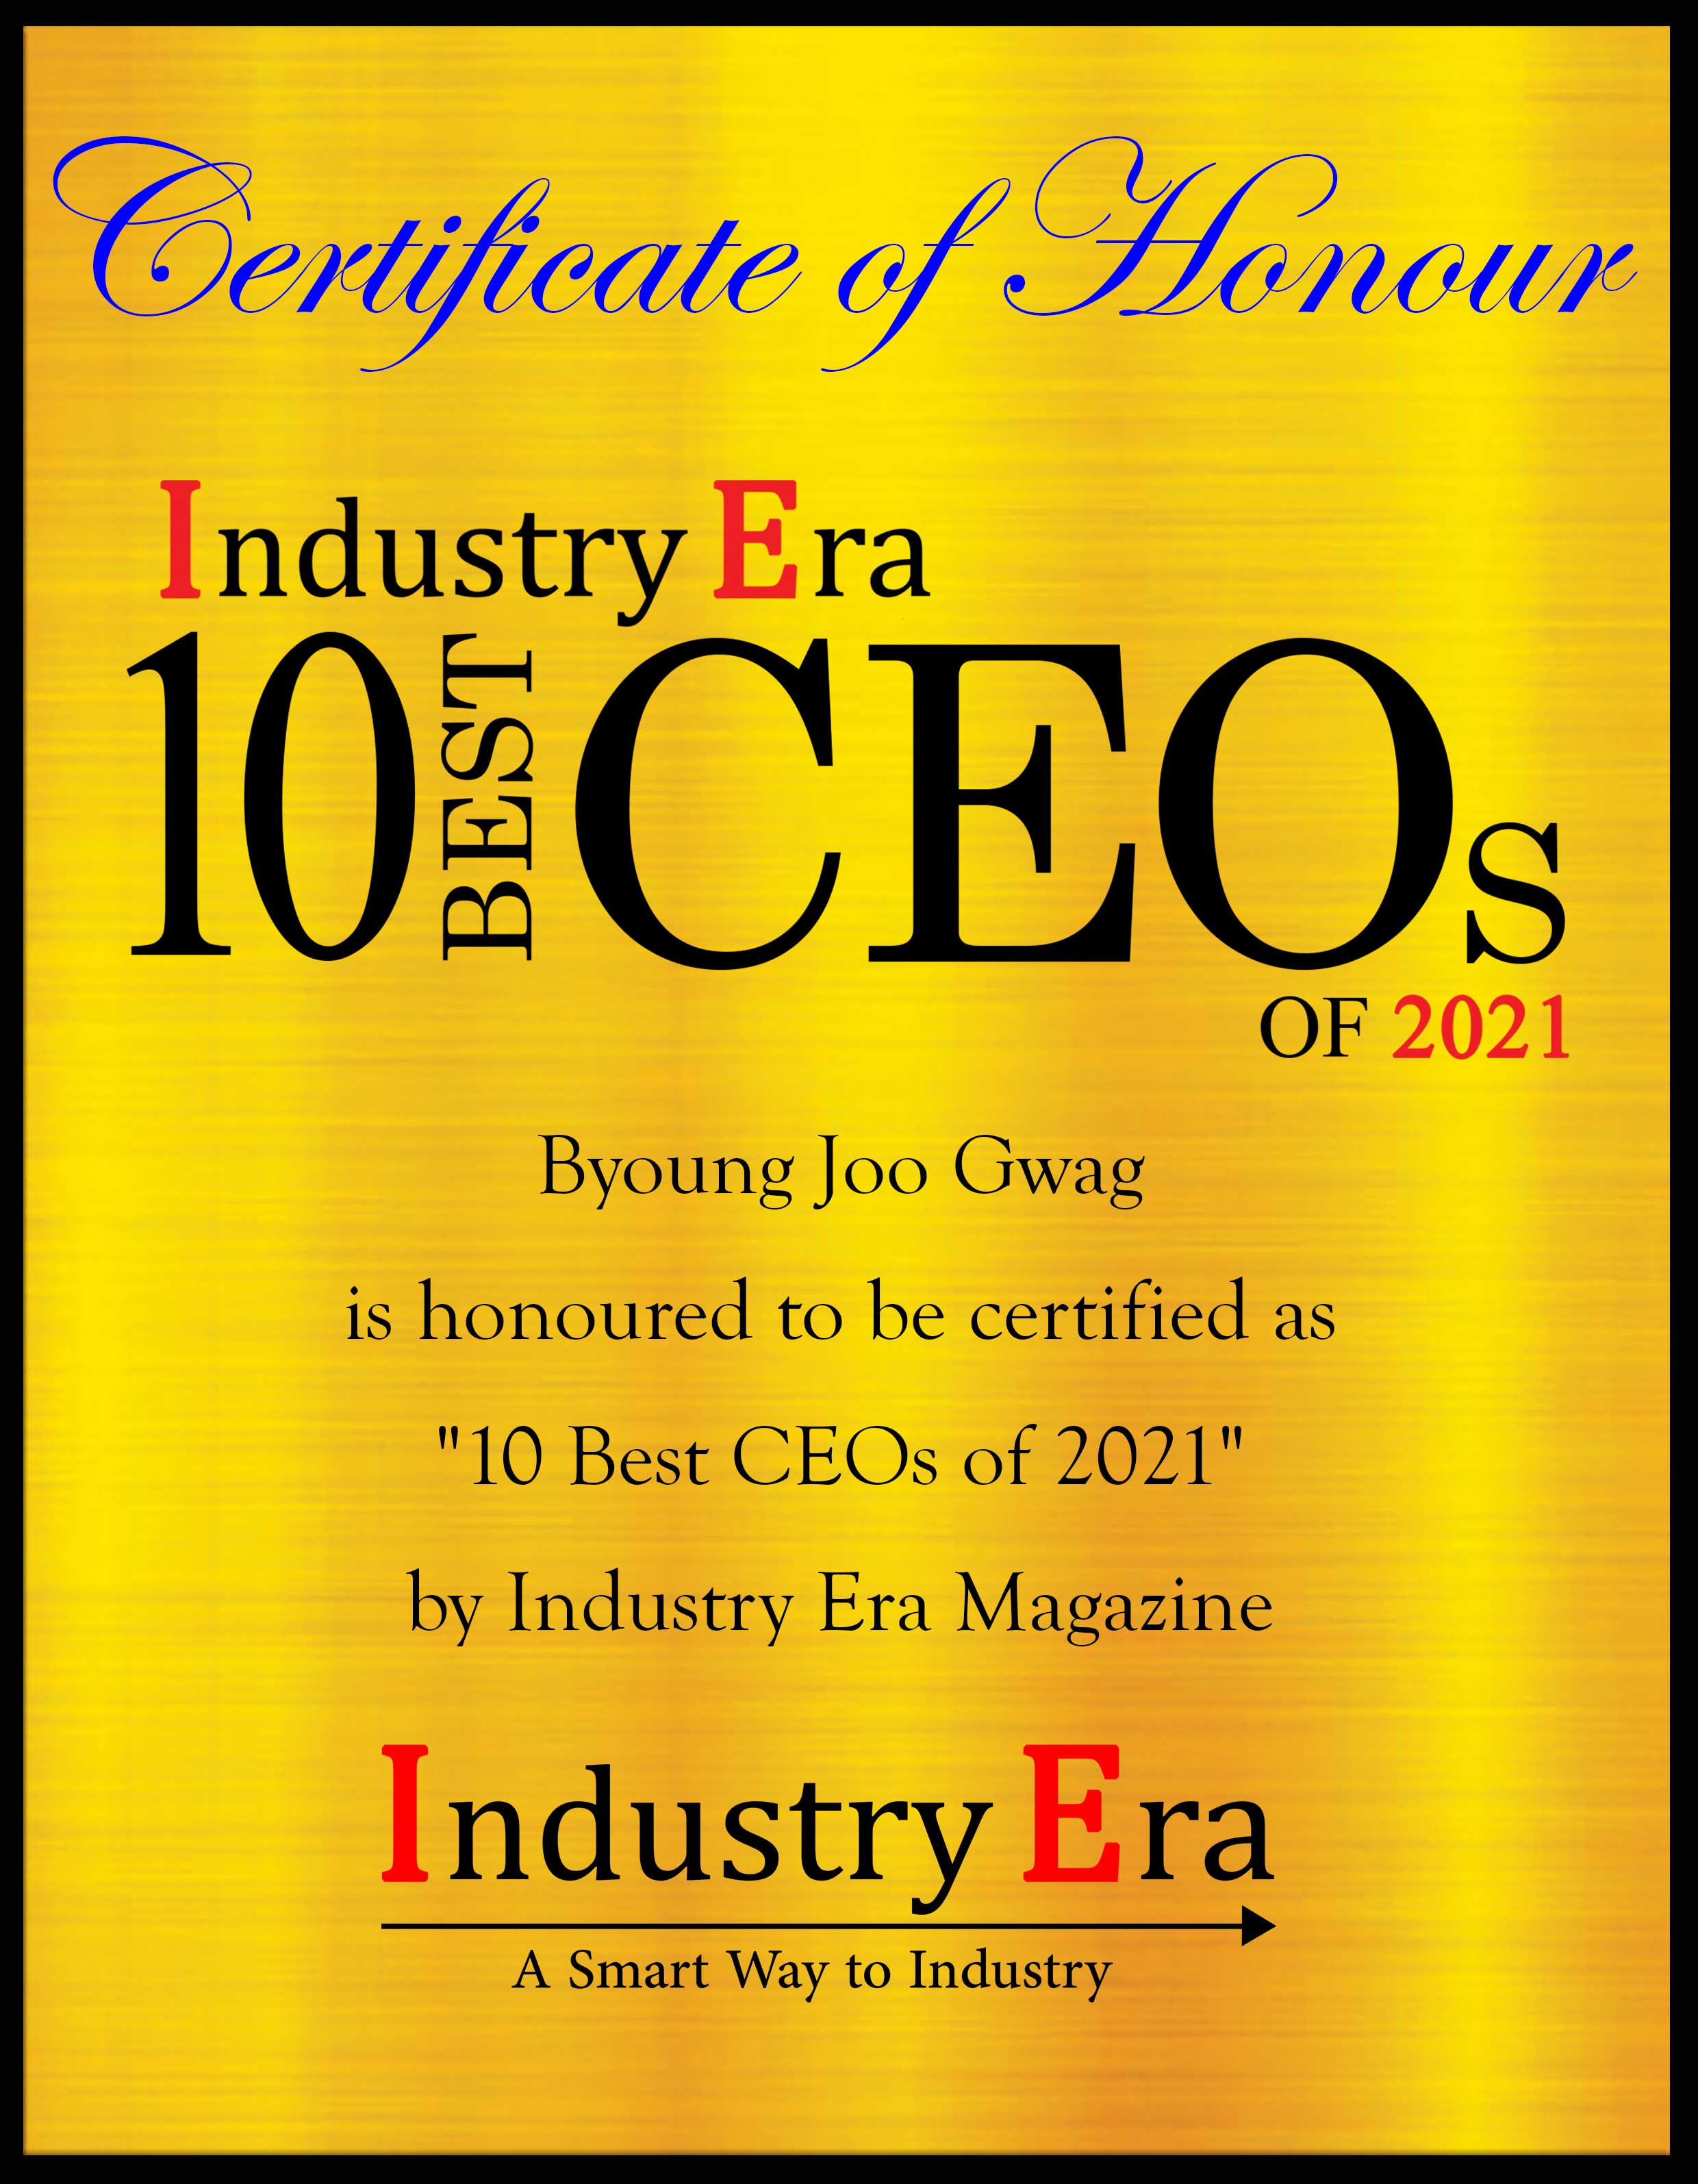 Byoung Joo Gwag, CEO & President of GNT Pharma Certificate